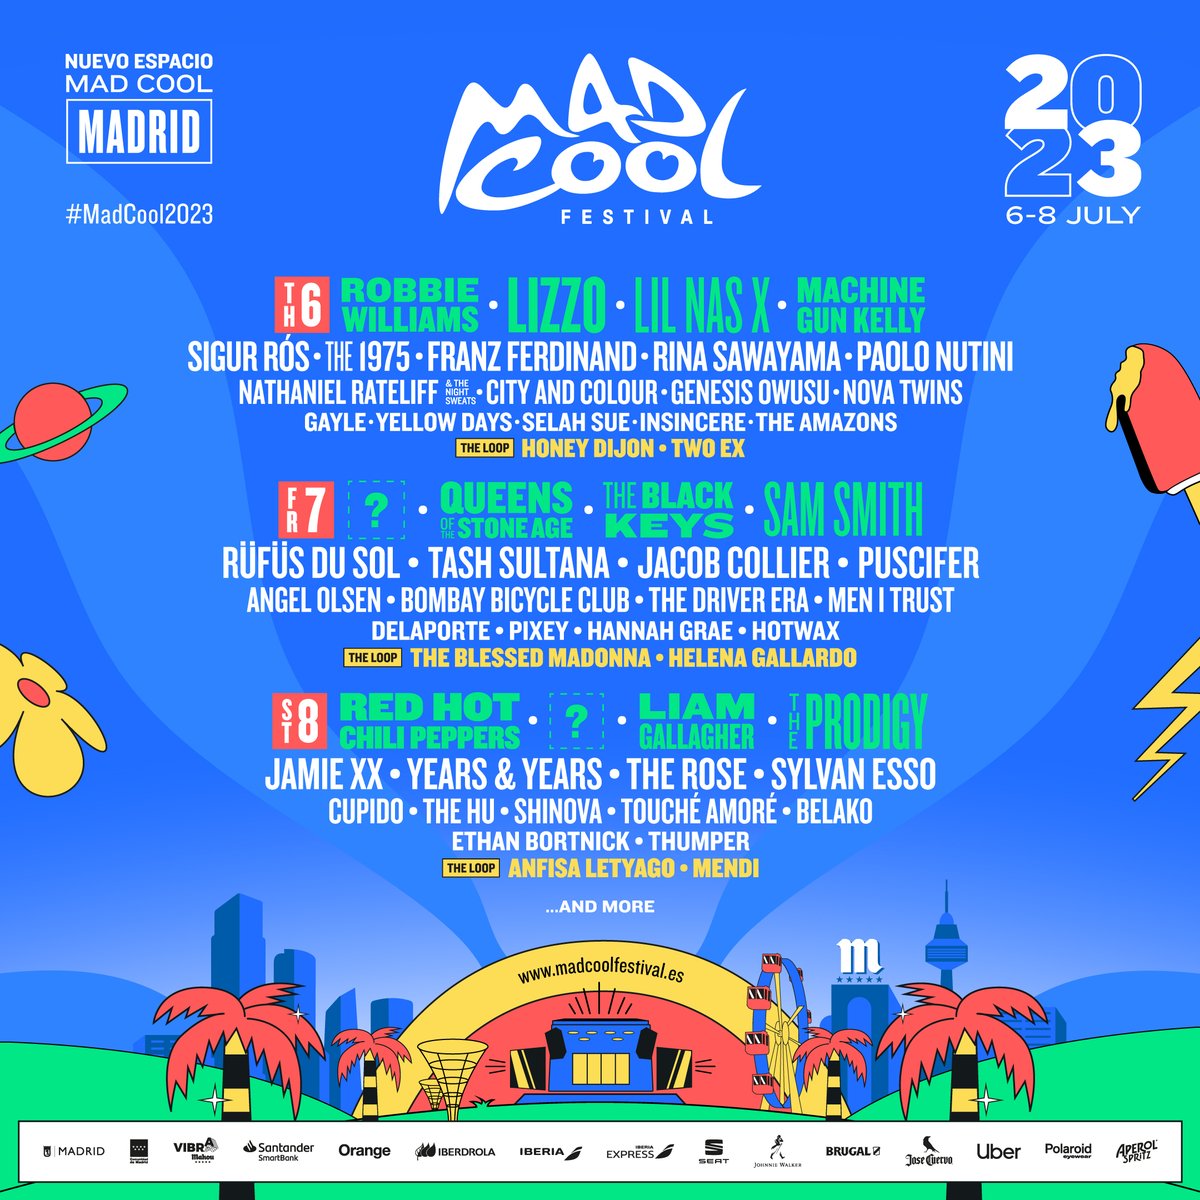 💥Welcome to Mad Cool 2023💥 See you on July 6-8Th in MADRID with @ChiliPeppers @lizzo @robbiewilliams @rinasawayama and many more 🤩